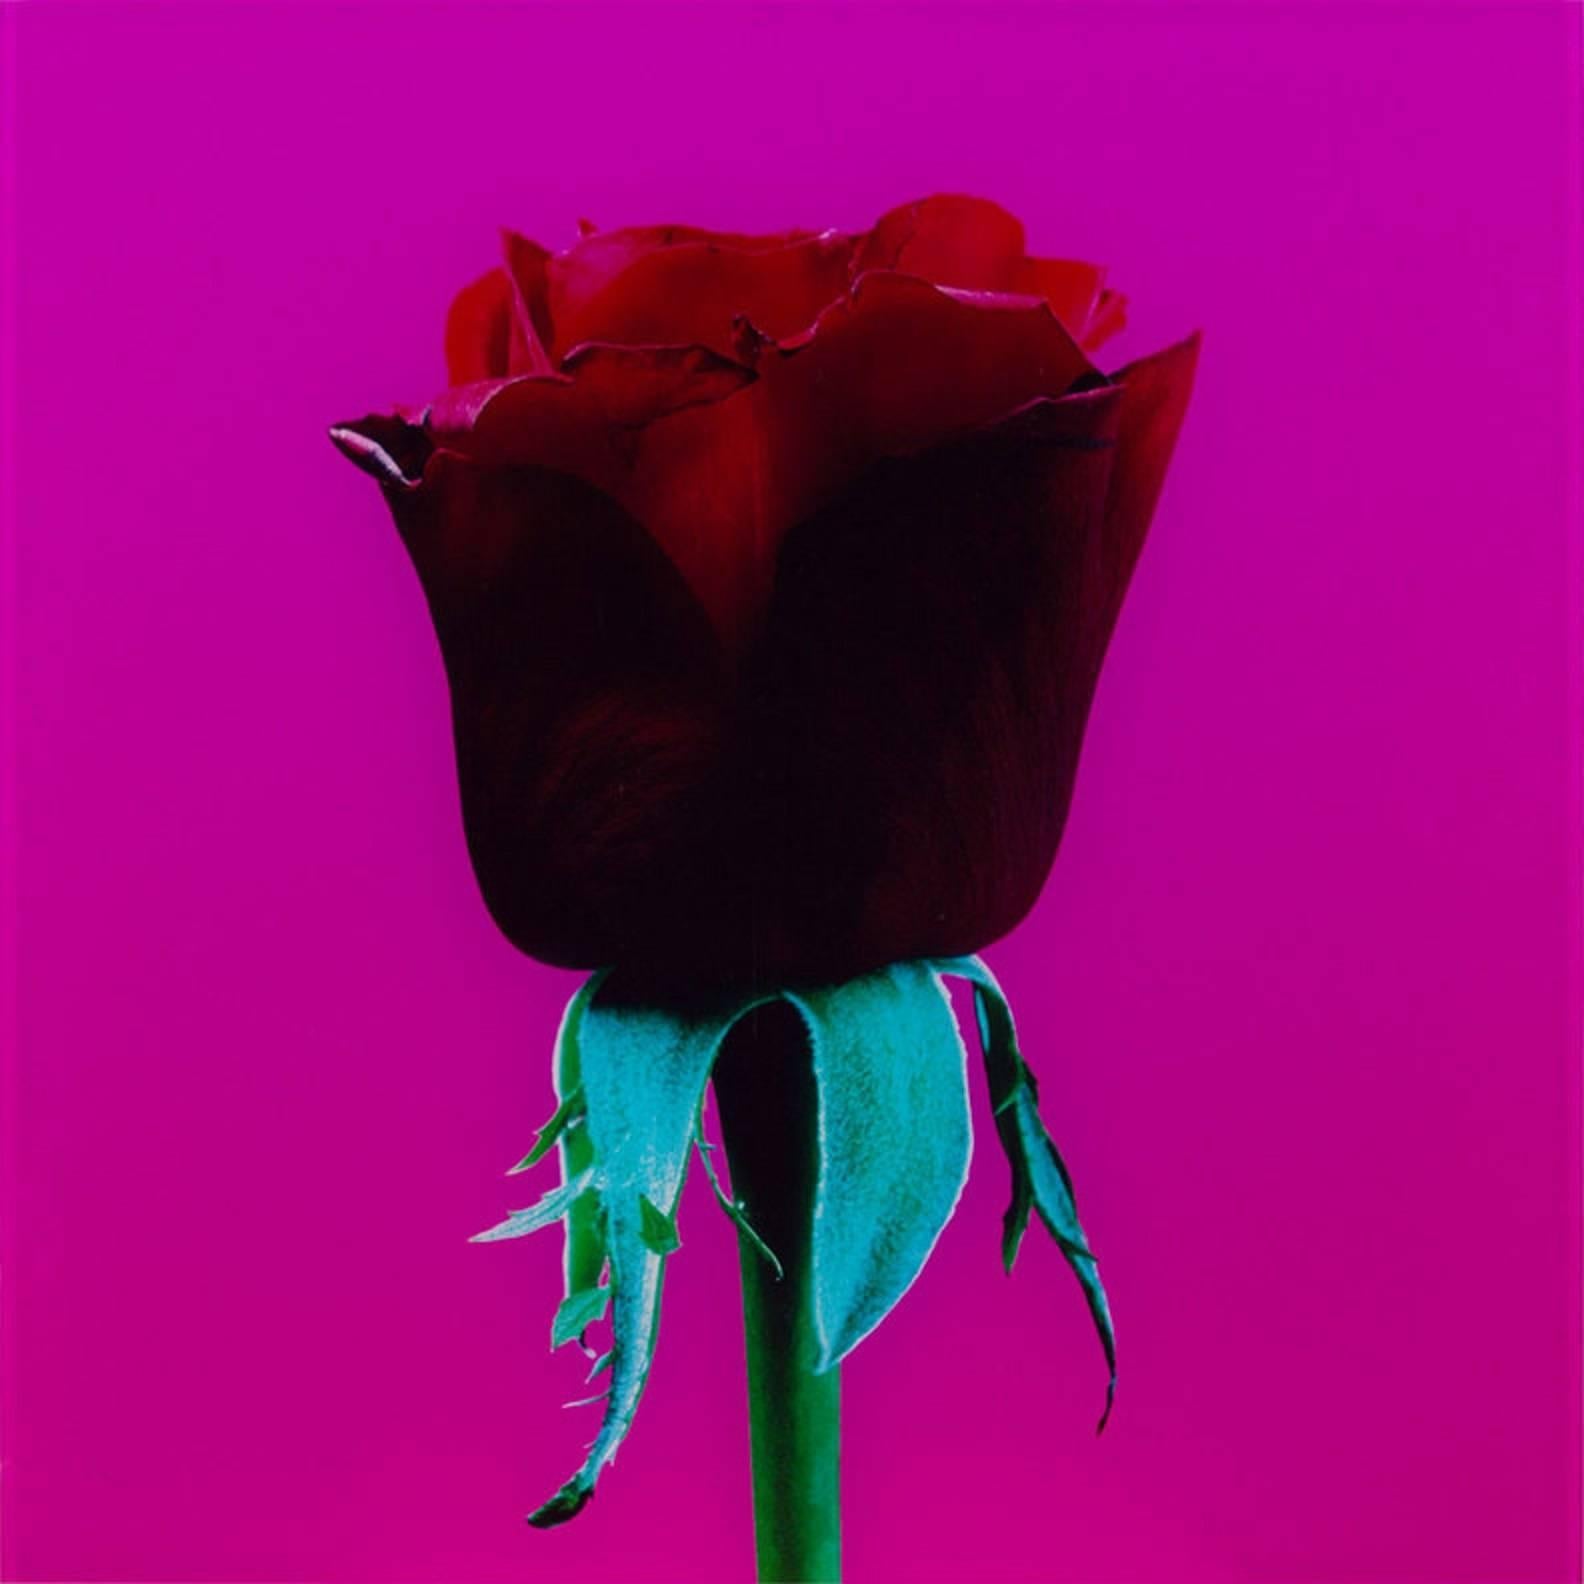 UNTITLED (RED ROSE) Elisabeth Montagnier Photograph Mounted to Aluminum For Sale 1